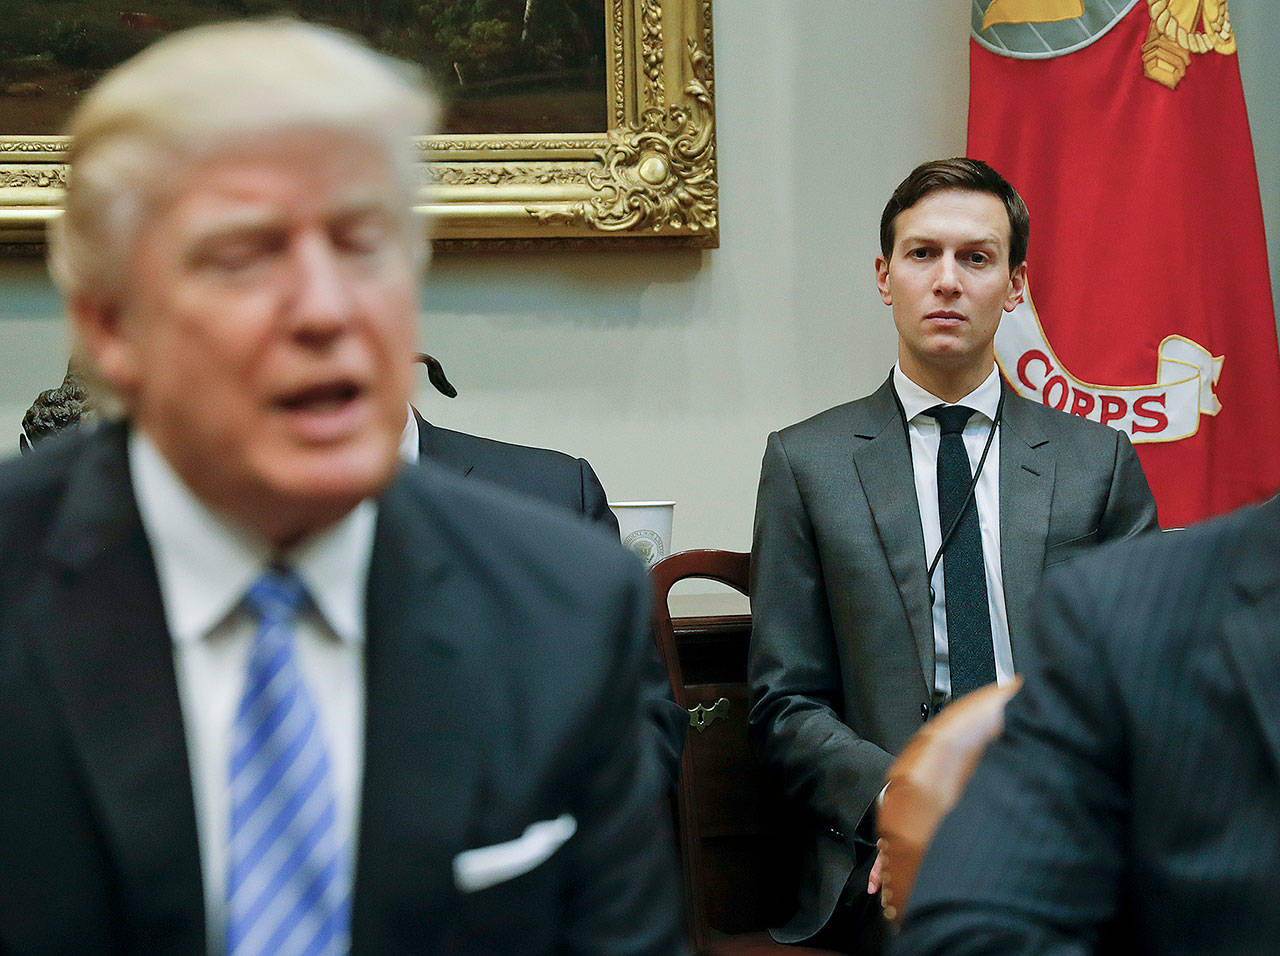 White House Senior Adviser Jared Kushner (right) listens to President Donald Trump during a breakfast with business leaders in the Roosevelt Room of the White House in Washington. (AP Photo/Pablo Martinez Monsivais, File)